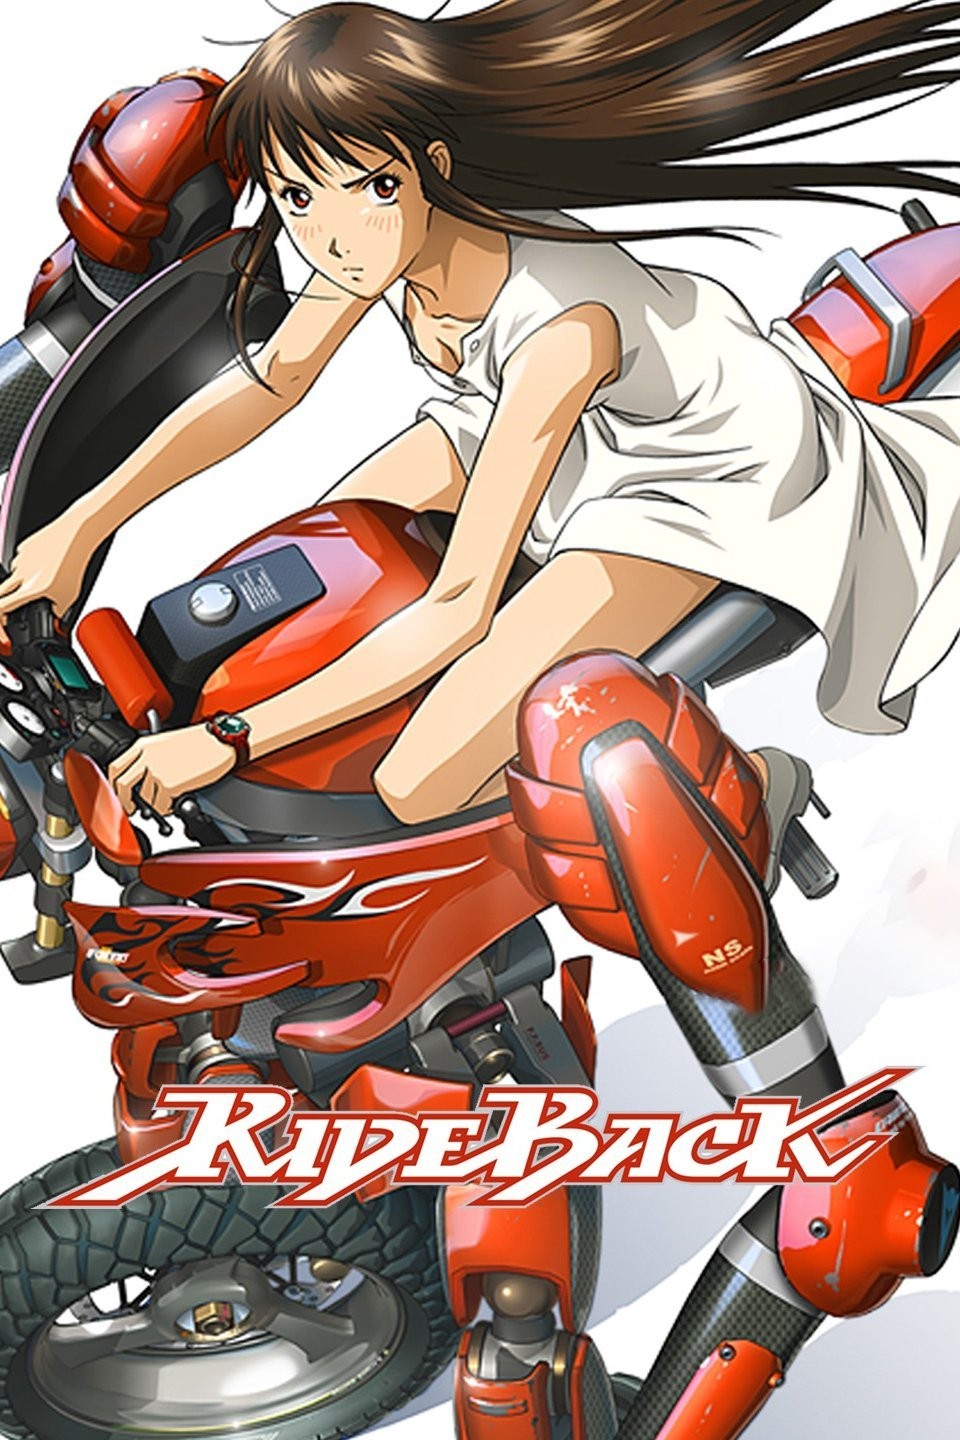 For the Anime lovers out there that like Motorcycles : r/motorcycles